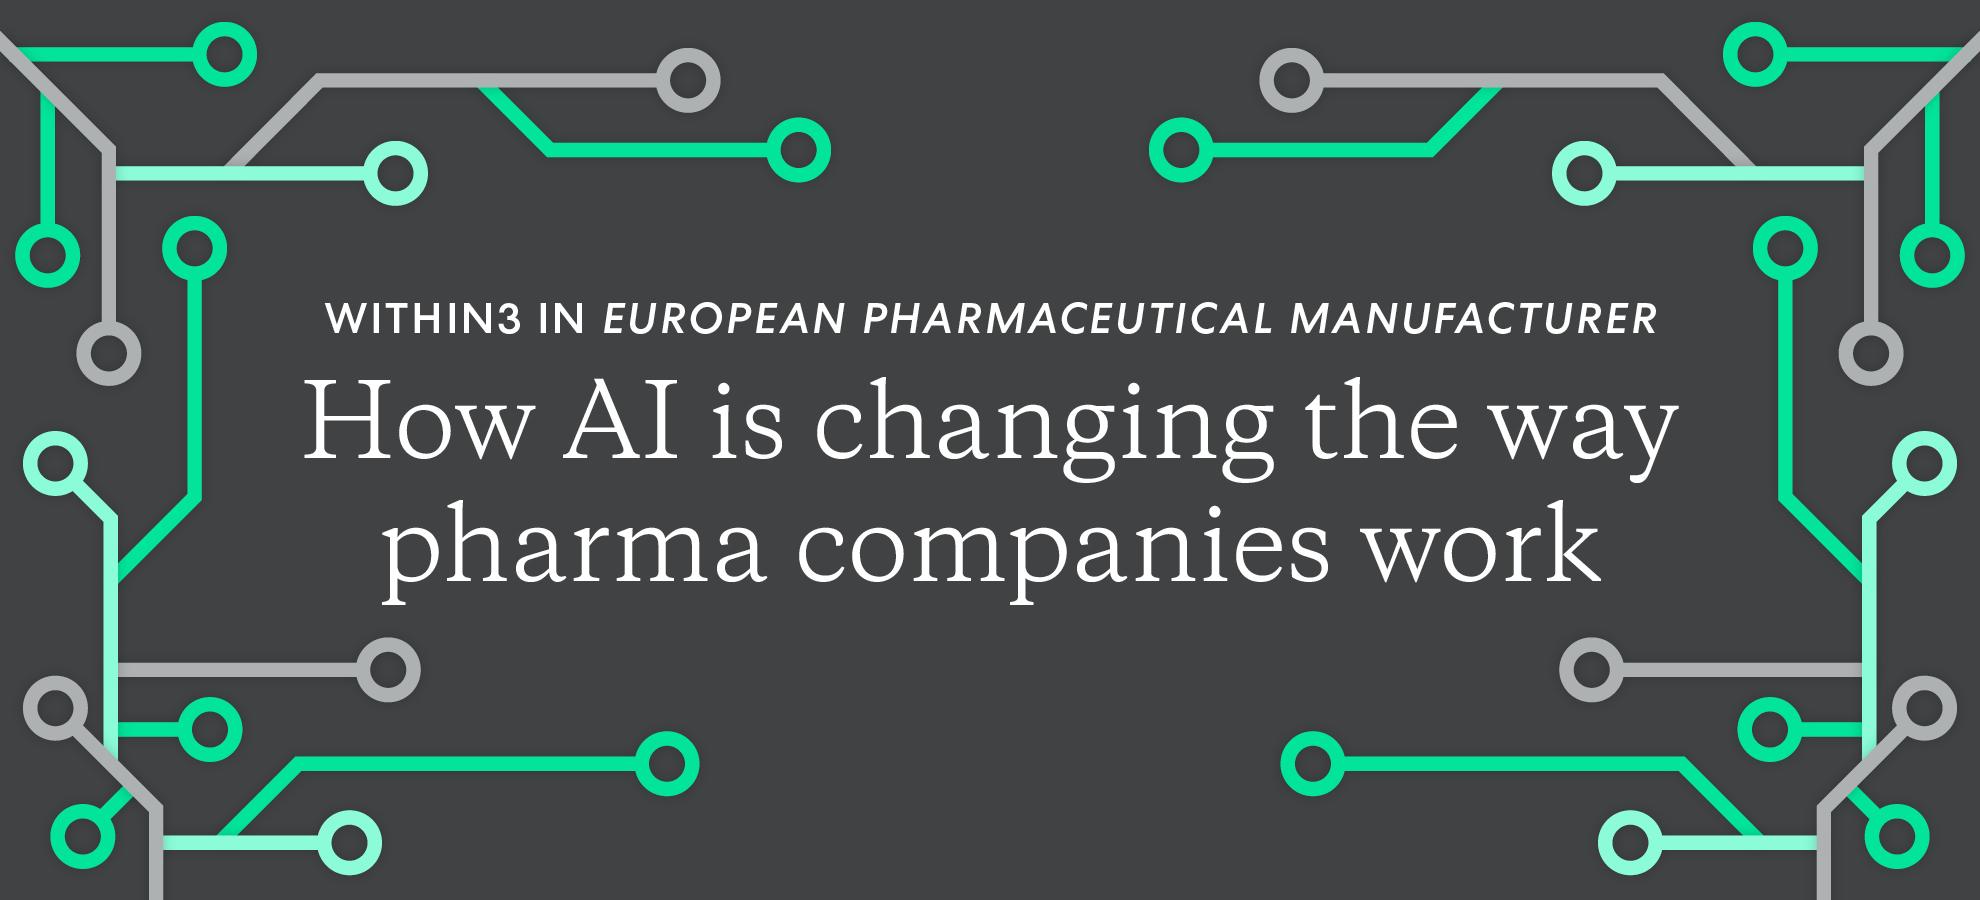 Within3 in European Pharmaceutical Manufacturer: how AI is changing the way pharma companies work